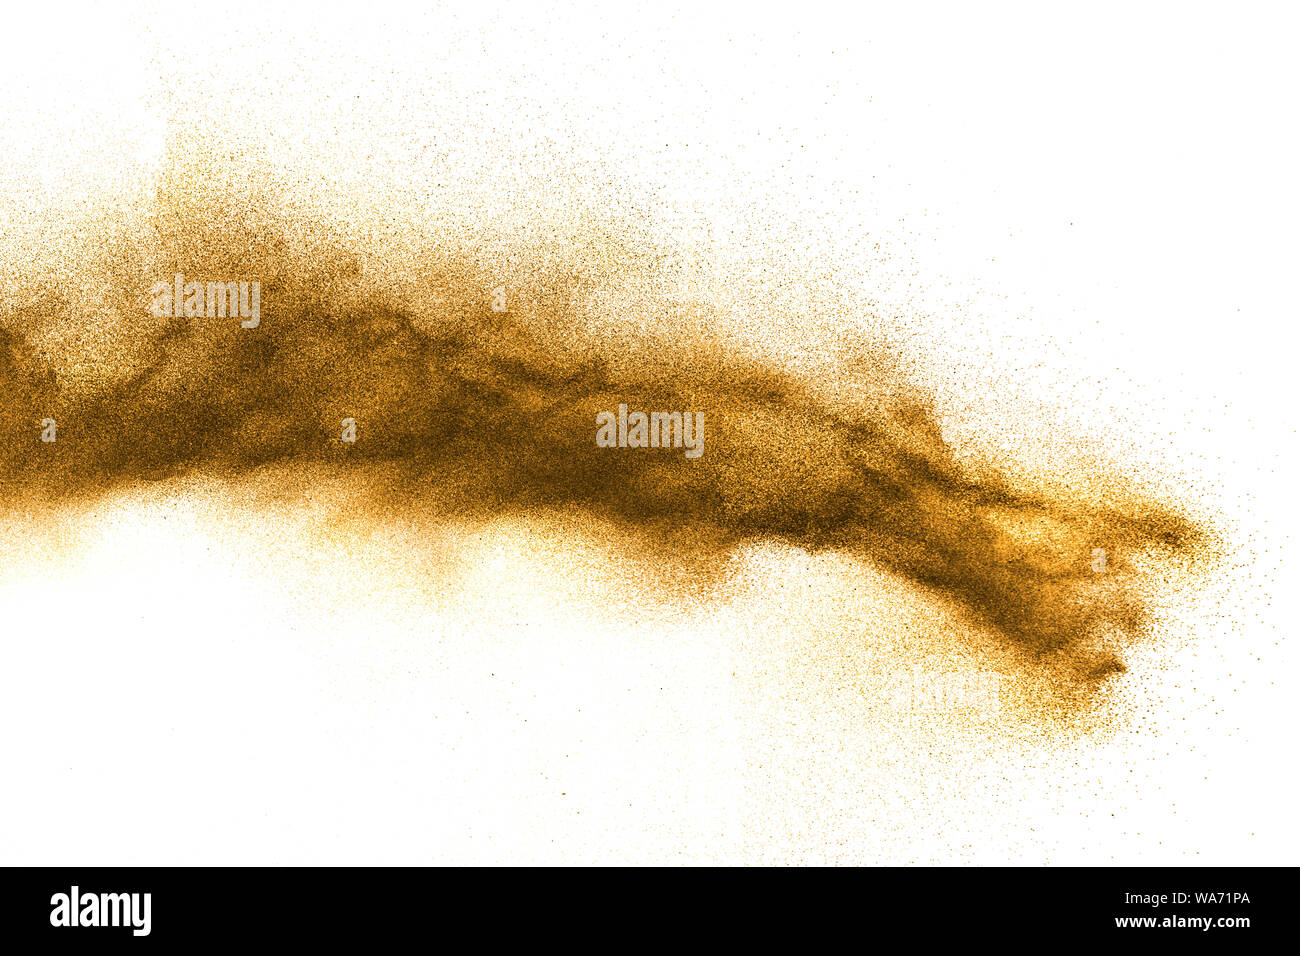 Black sand explosion against white background.The particles of sand splattered on white background Stock Photo